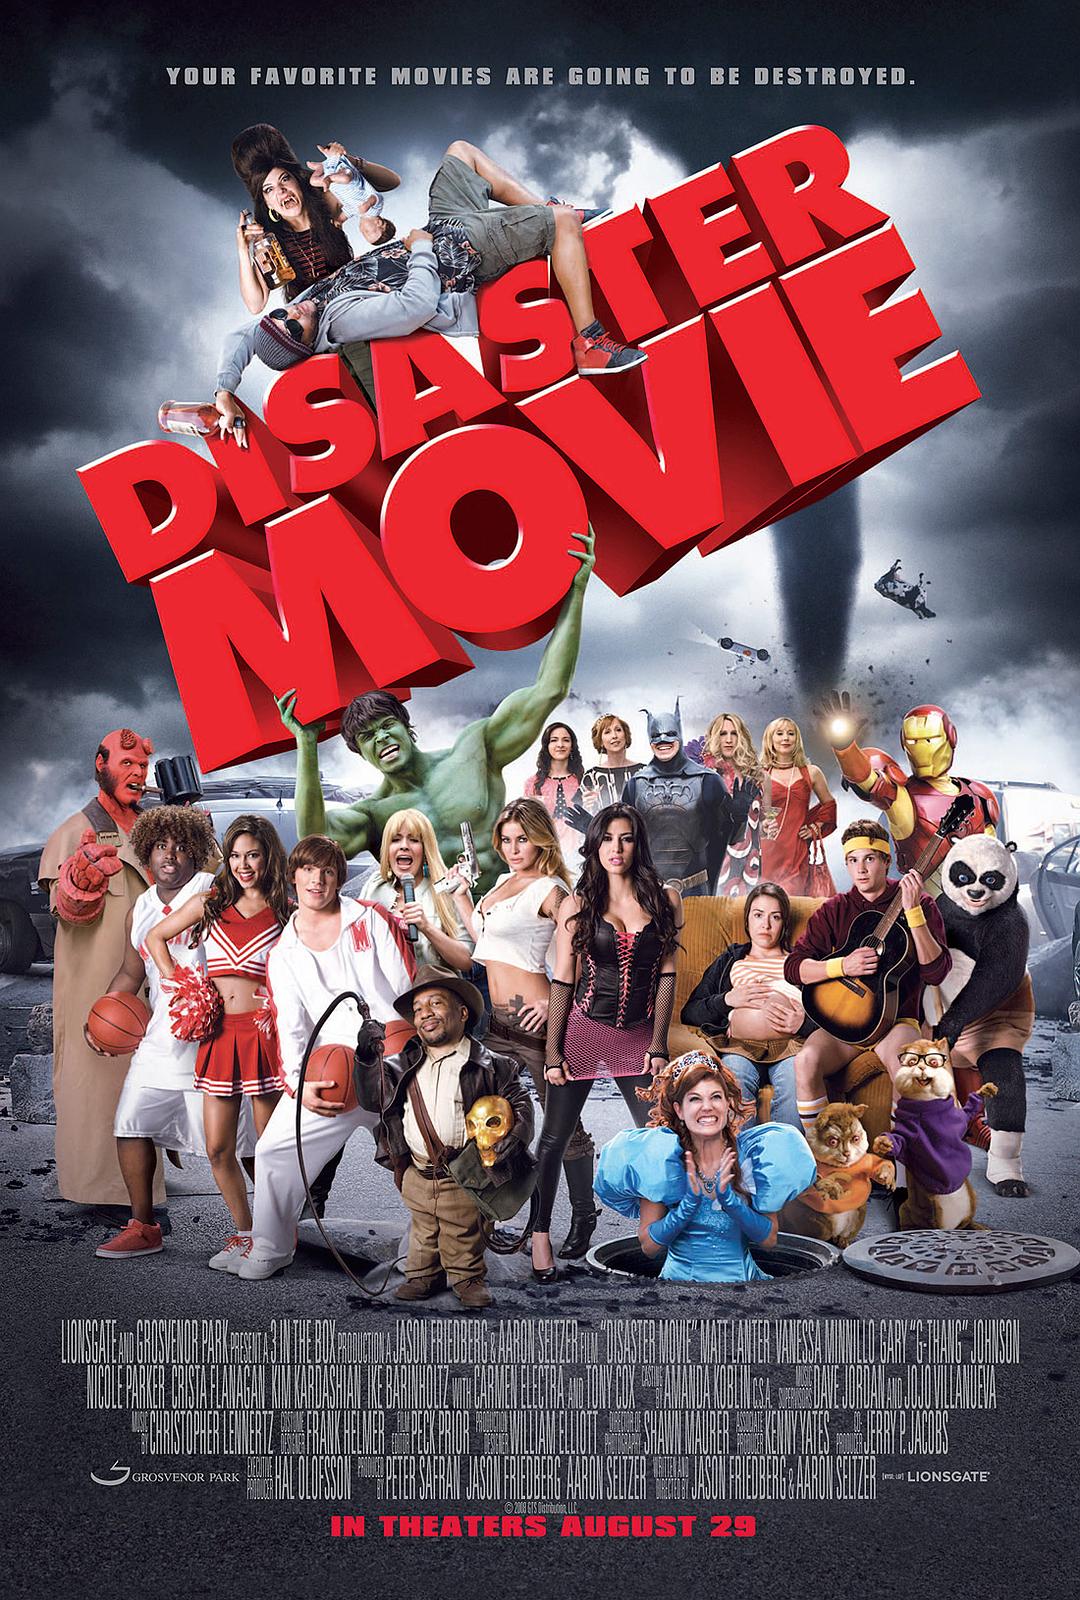 ѴӰ Disaster.Movie.2008.UNRATED.1080p.BluRay.x264-GUACAMOLE 6.55GB-1.png